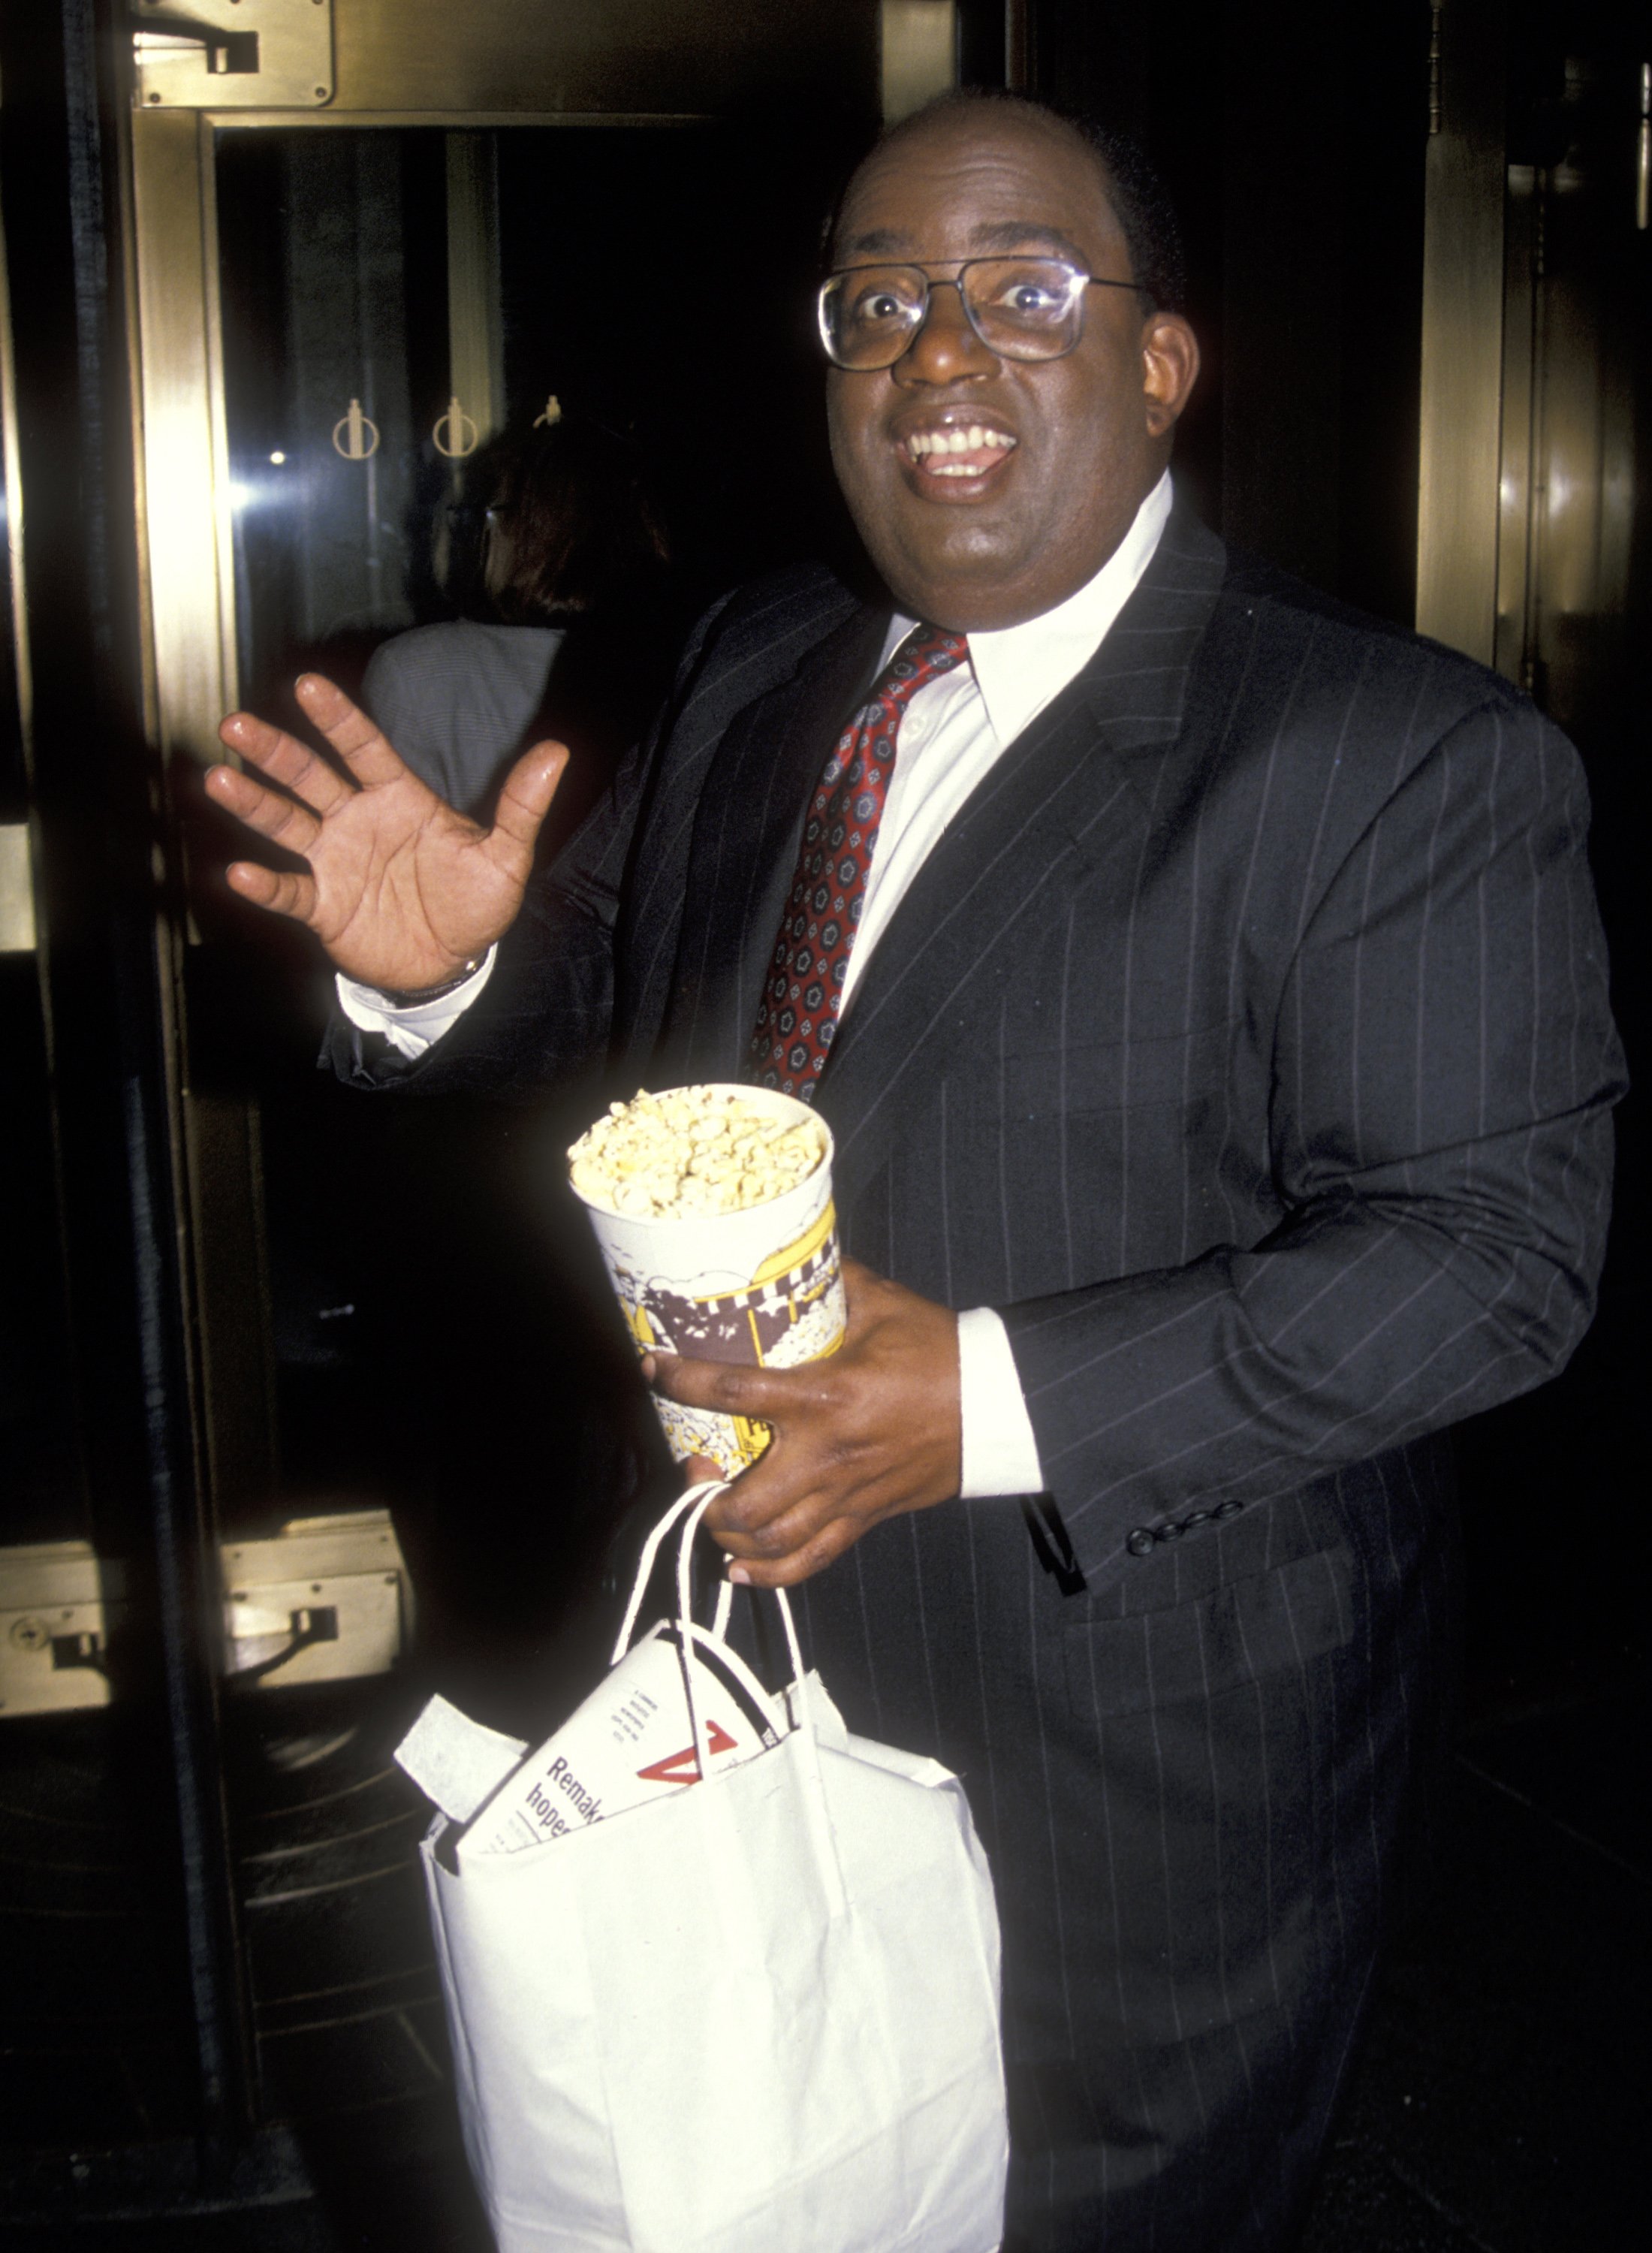 Al Roker at the Rockefeller Center in New York City, on October 22, 1990. | Source: Ron Galella/Ron Galella Collection/Getty Images